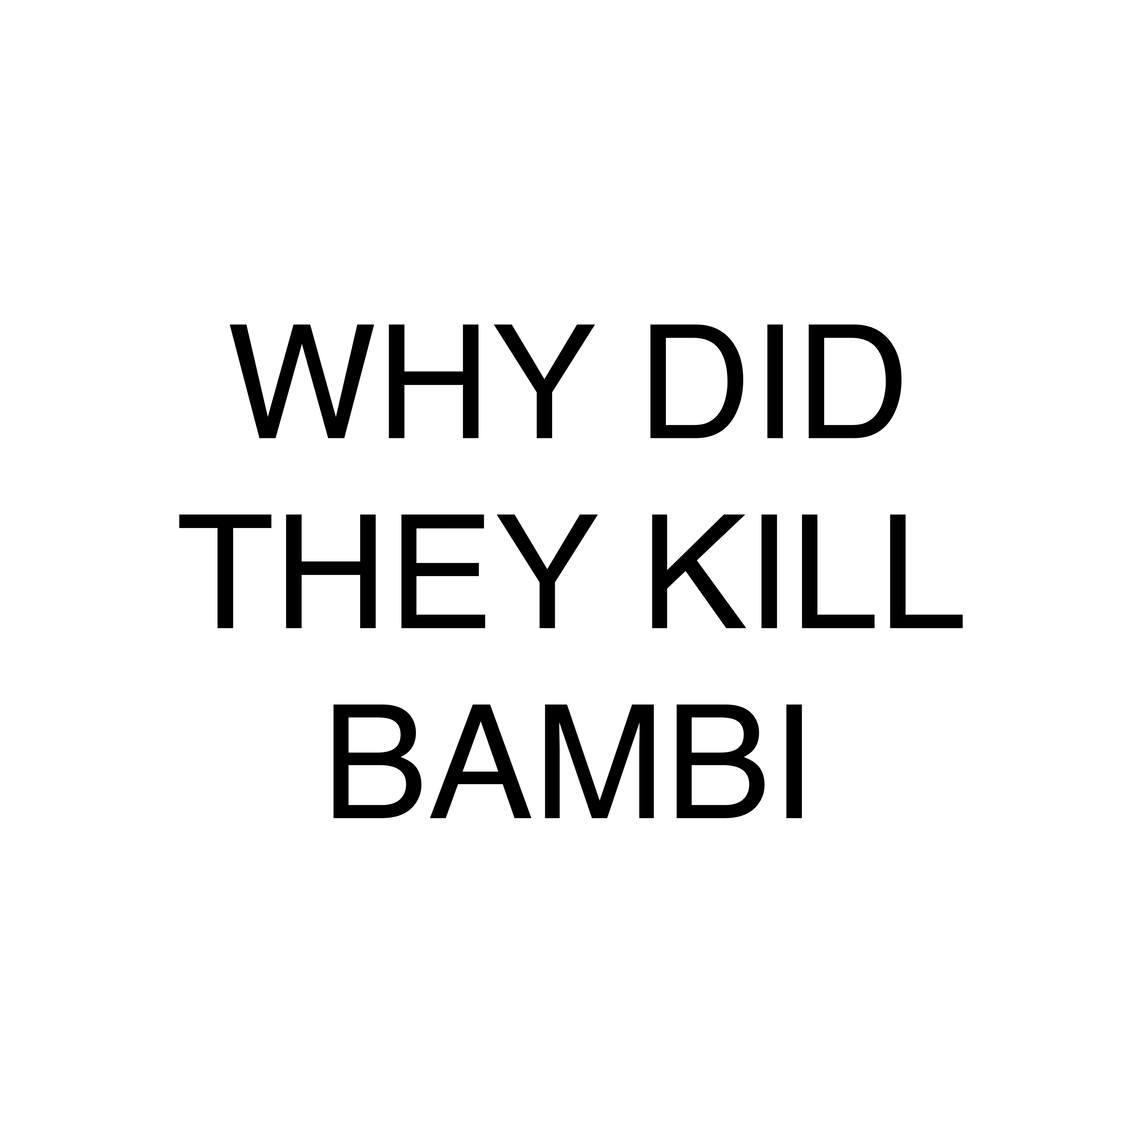  - WHY DID THEY KILL BAMBI